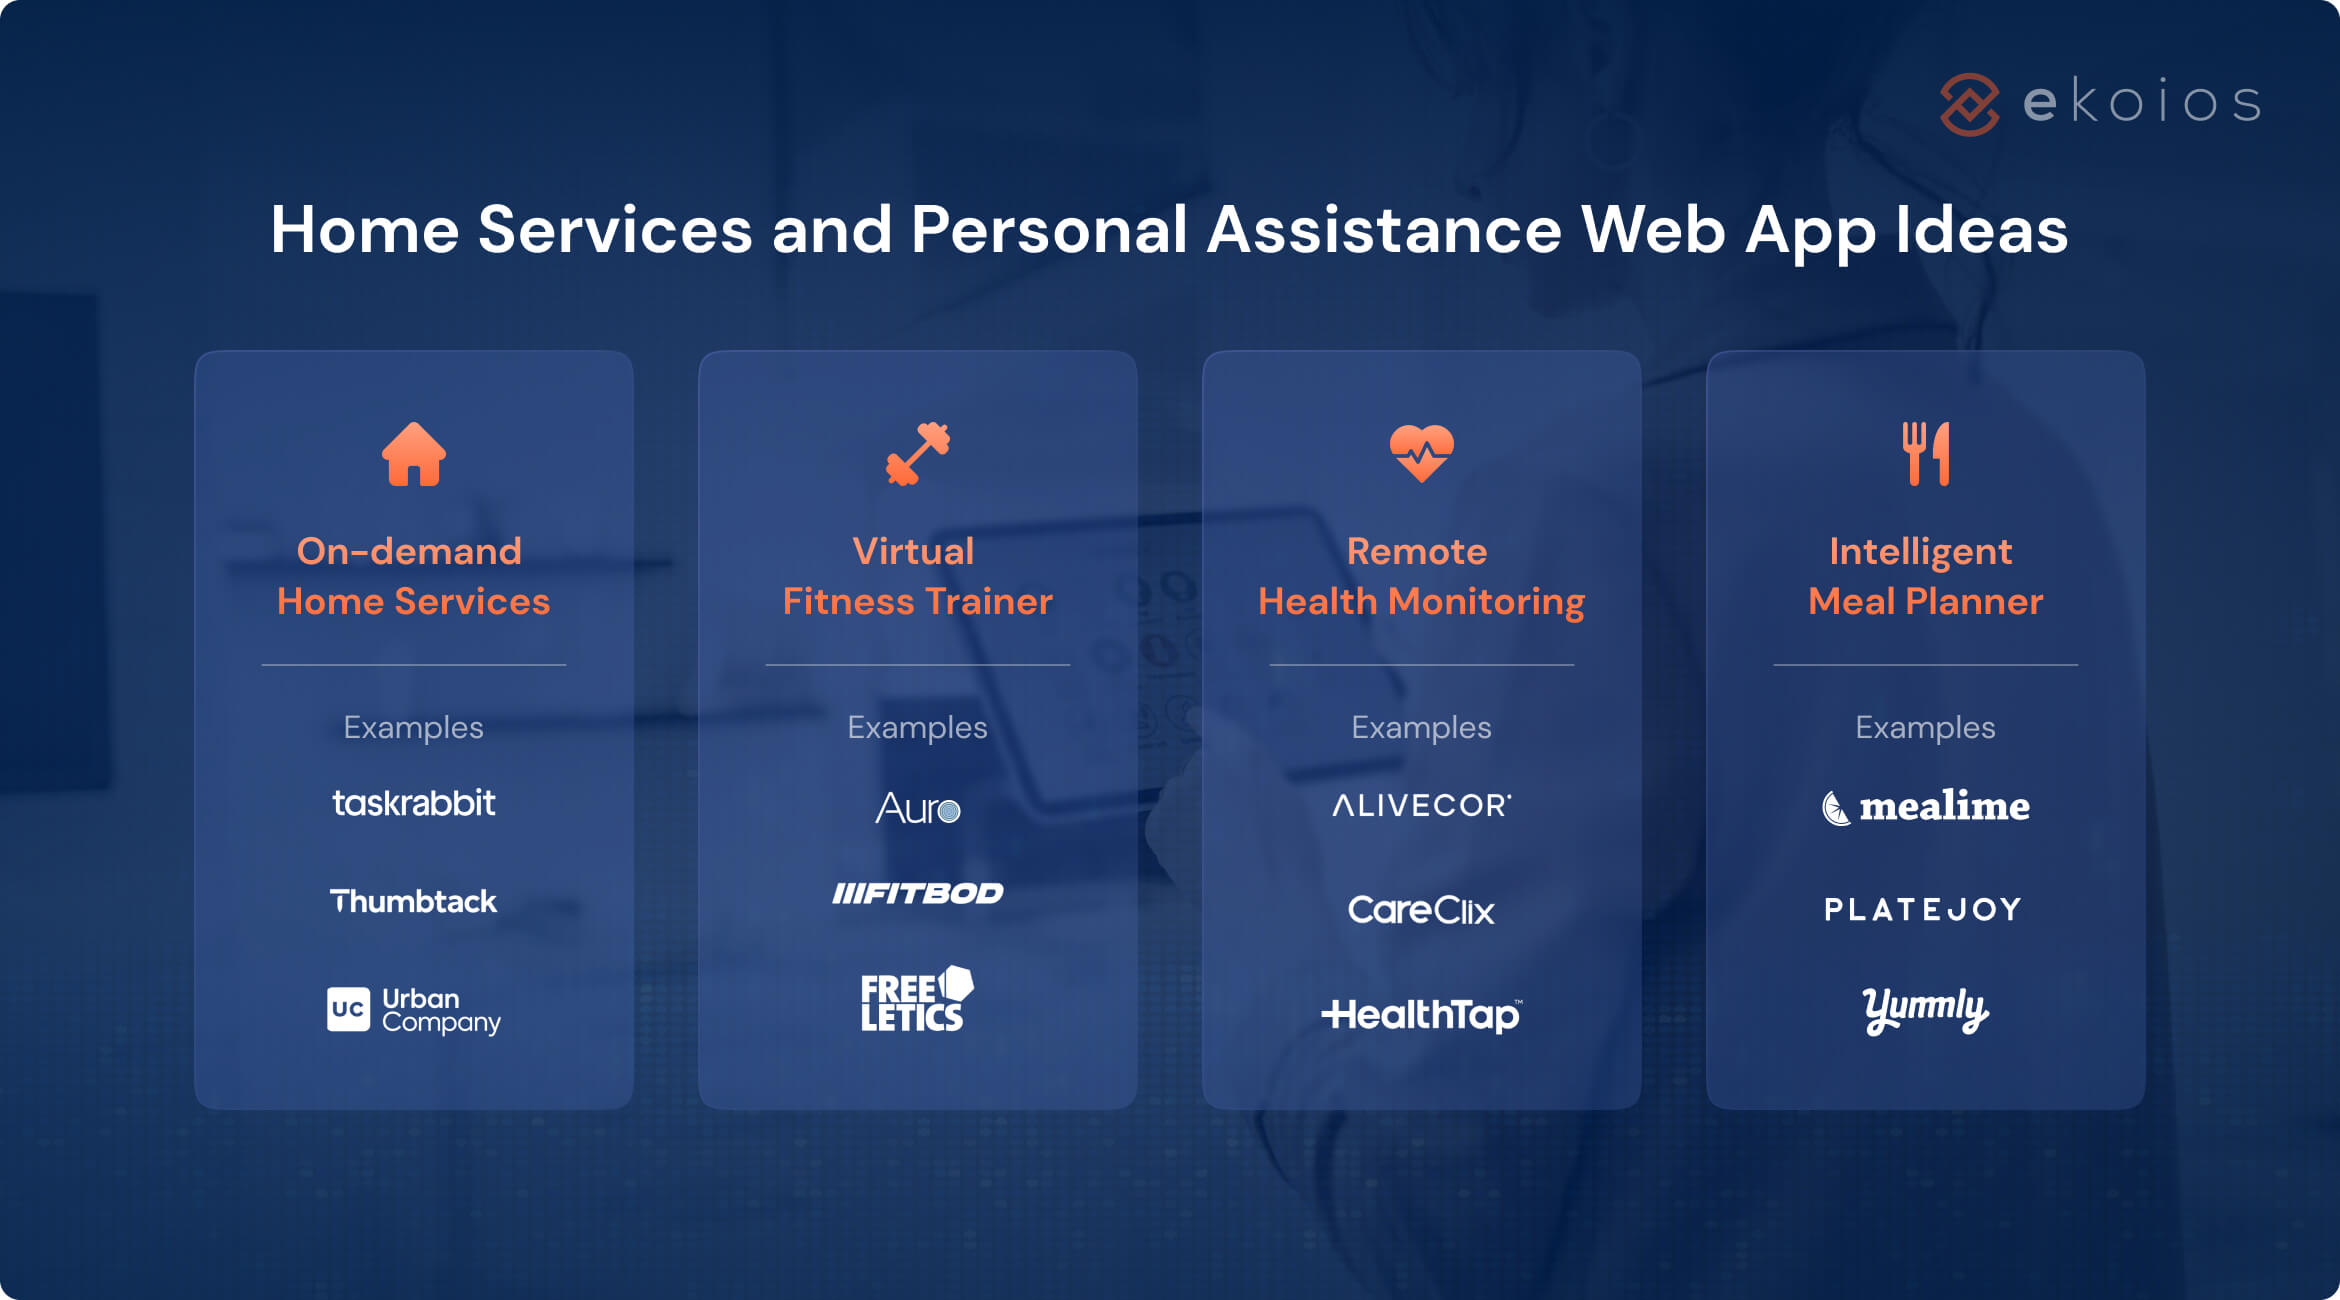 home services and personal assistance web app ideas